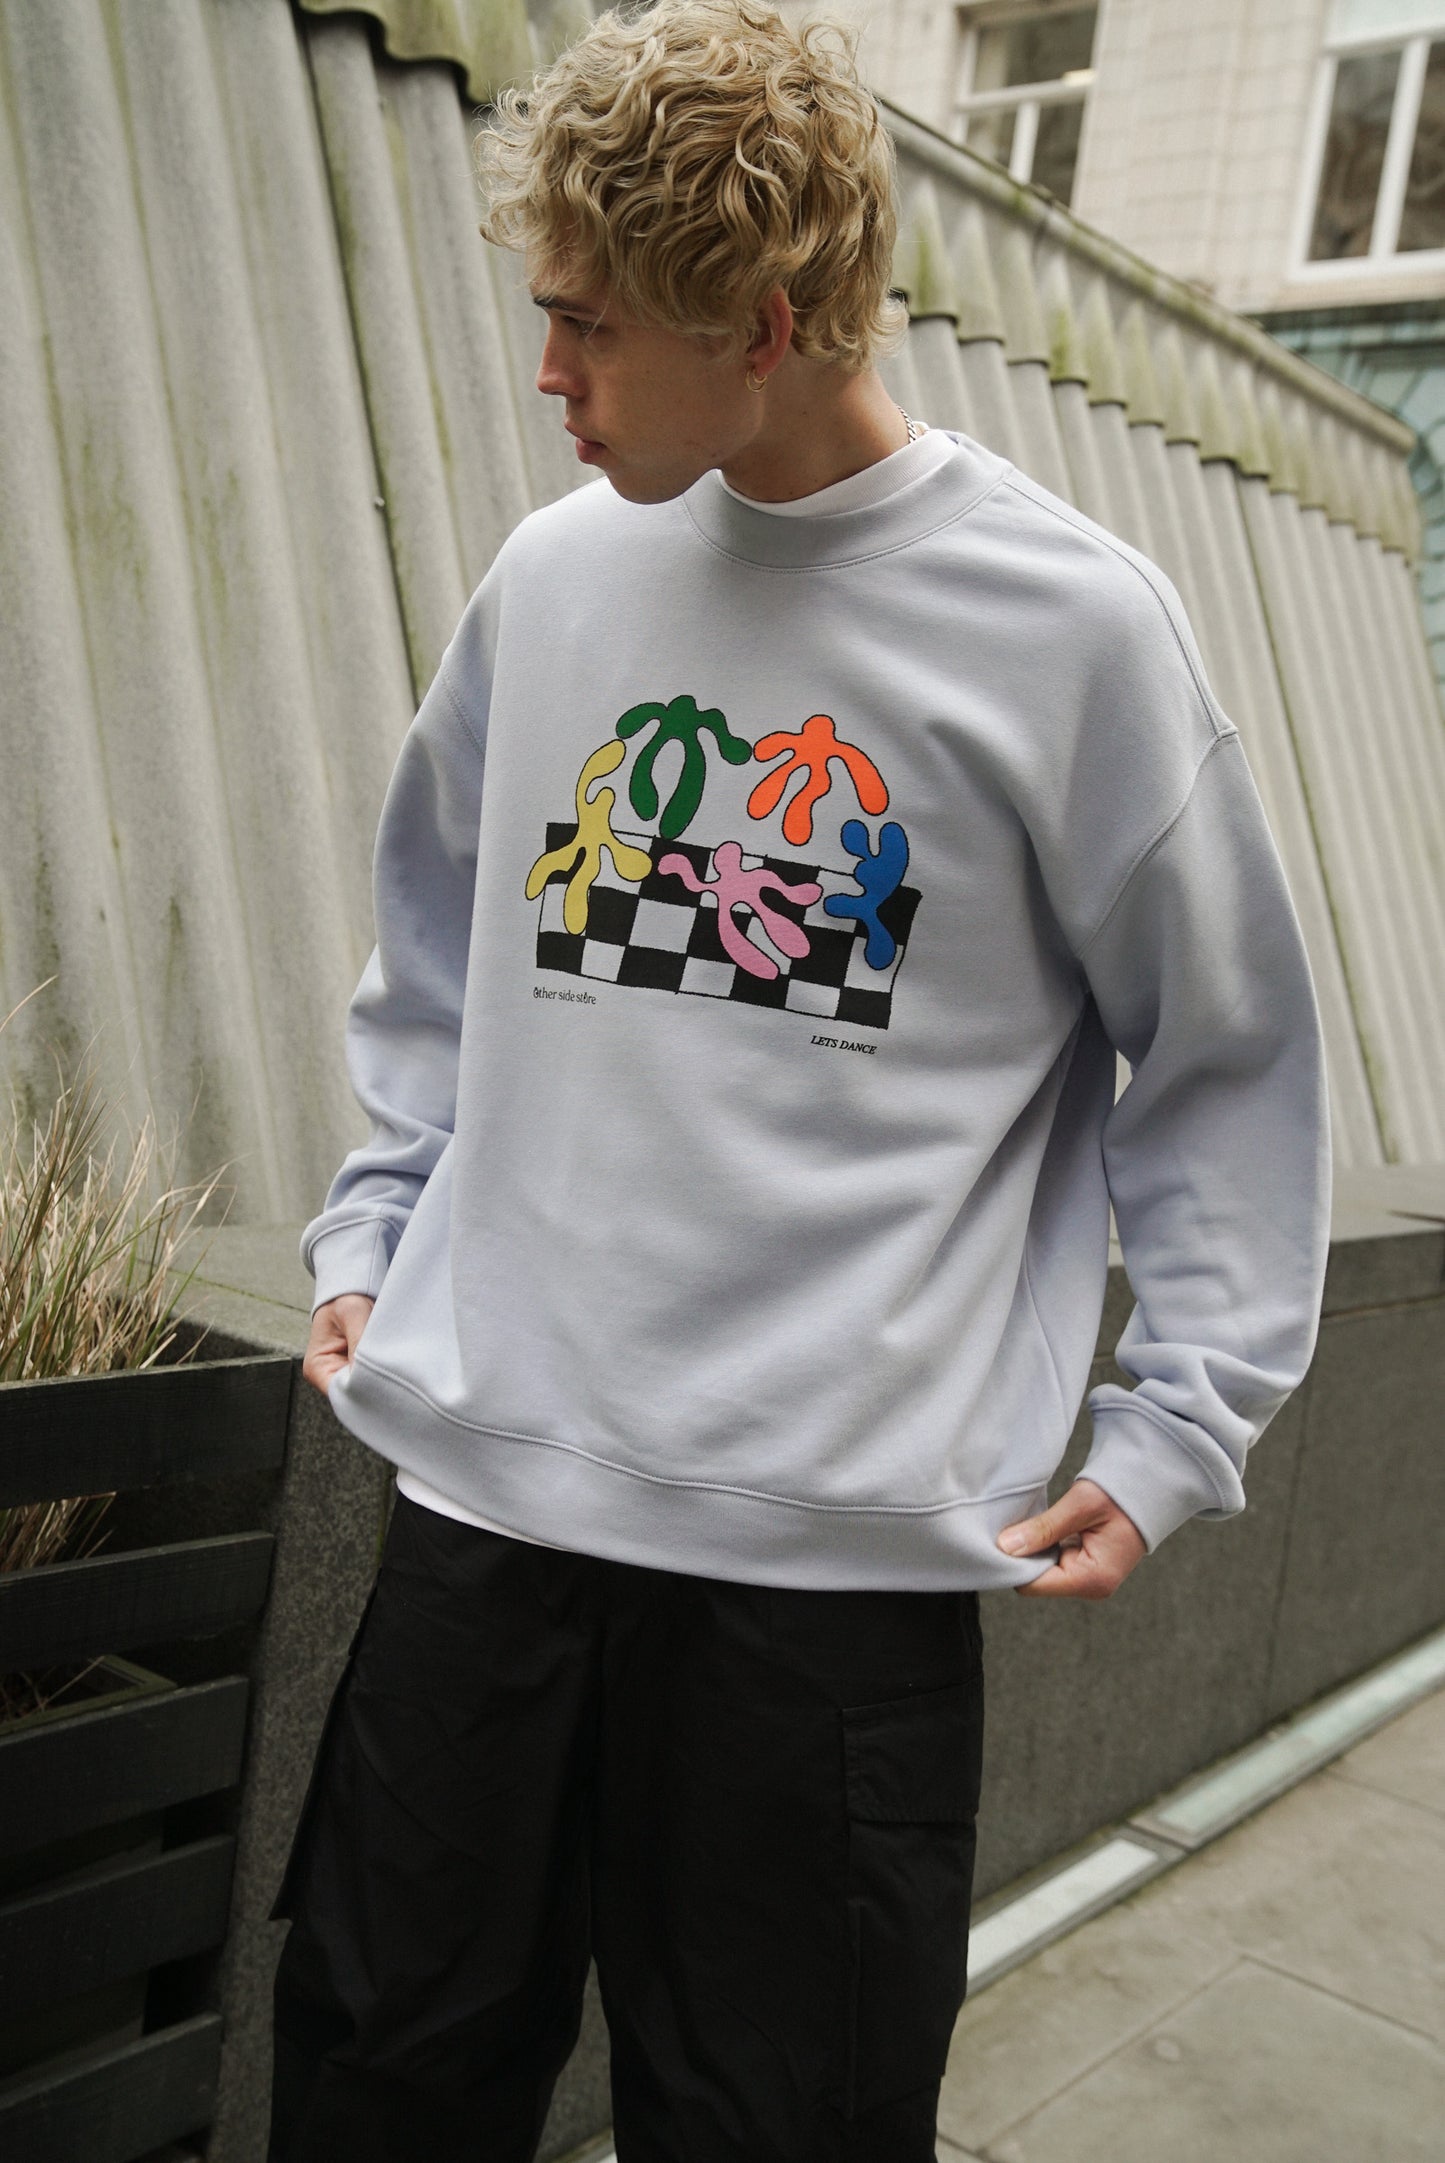 Other Side Store 'Lets Dance' Sweater - Powder Blue